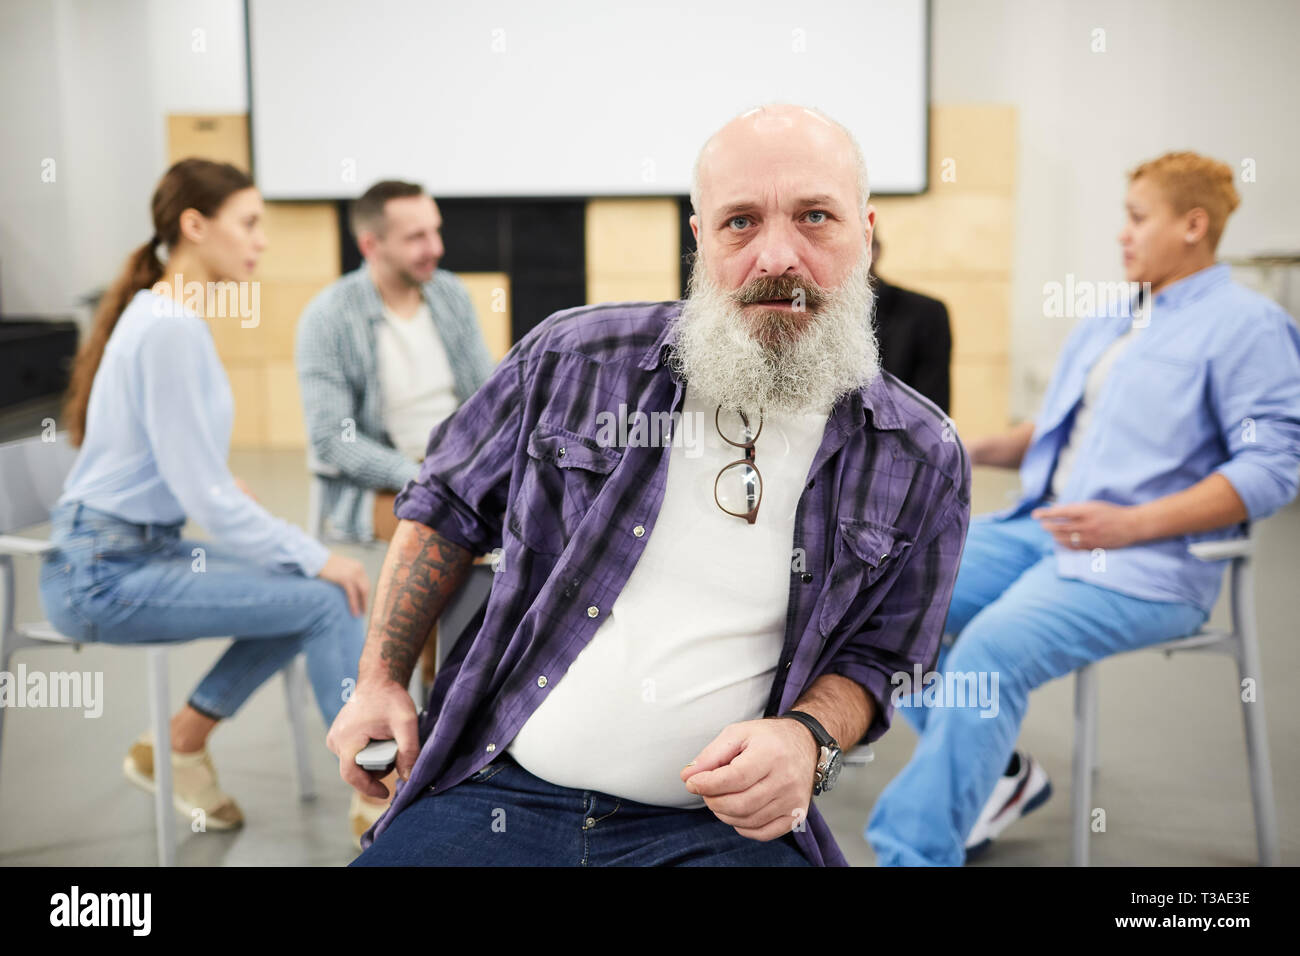 Tough Bearded Man in Therapy Session Stock Photo